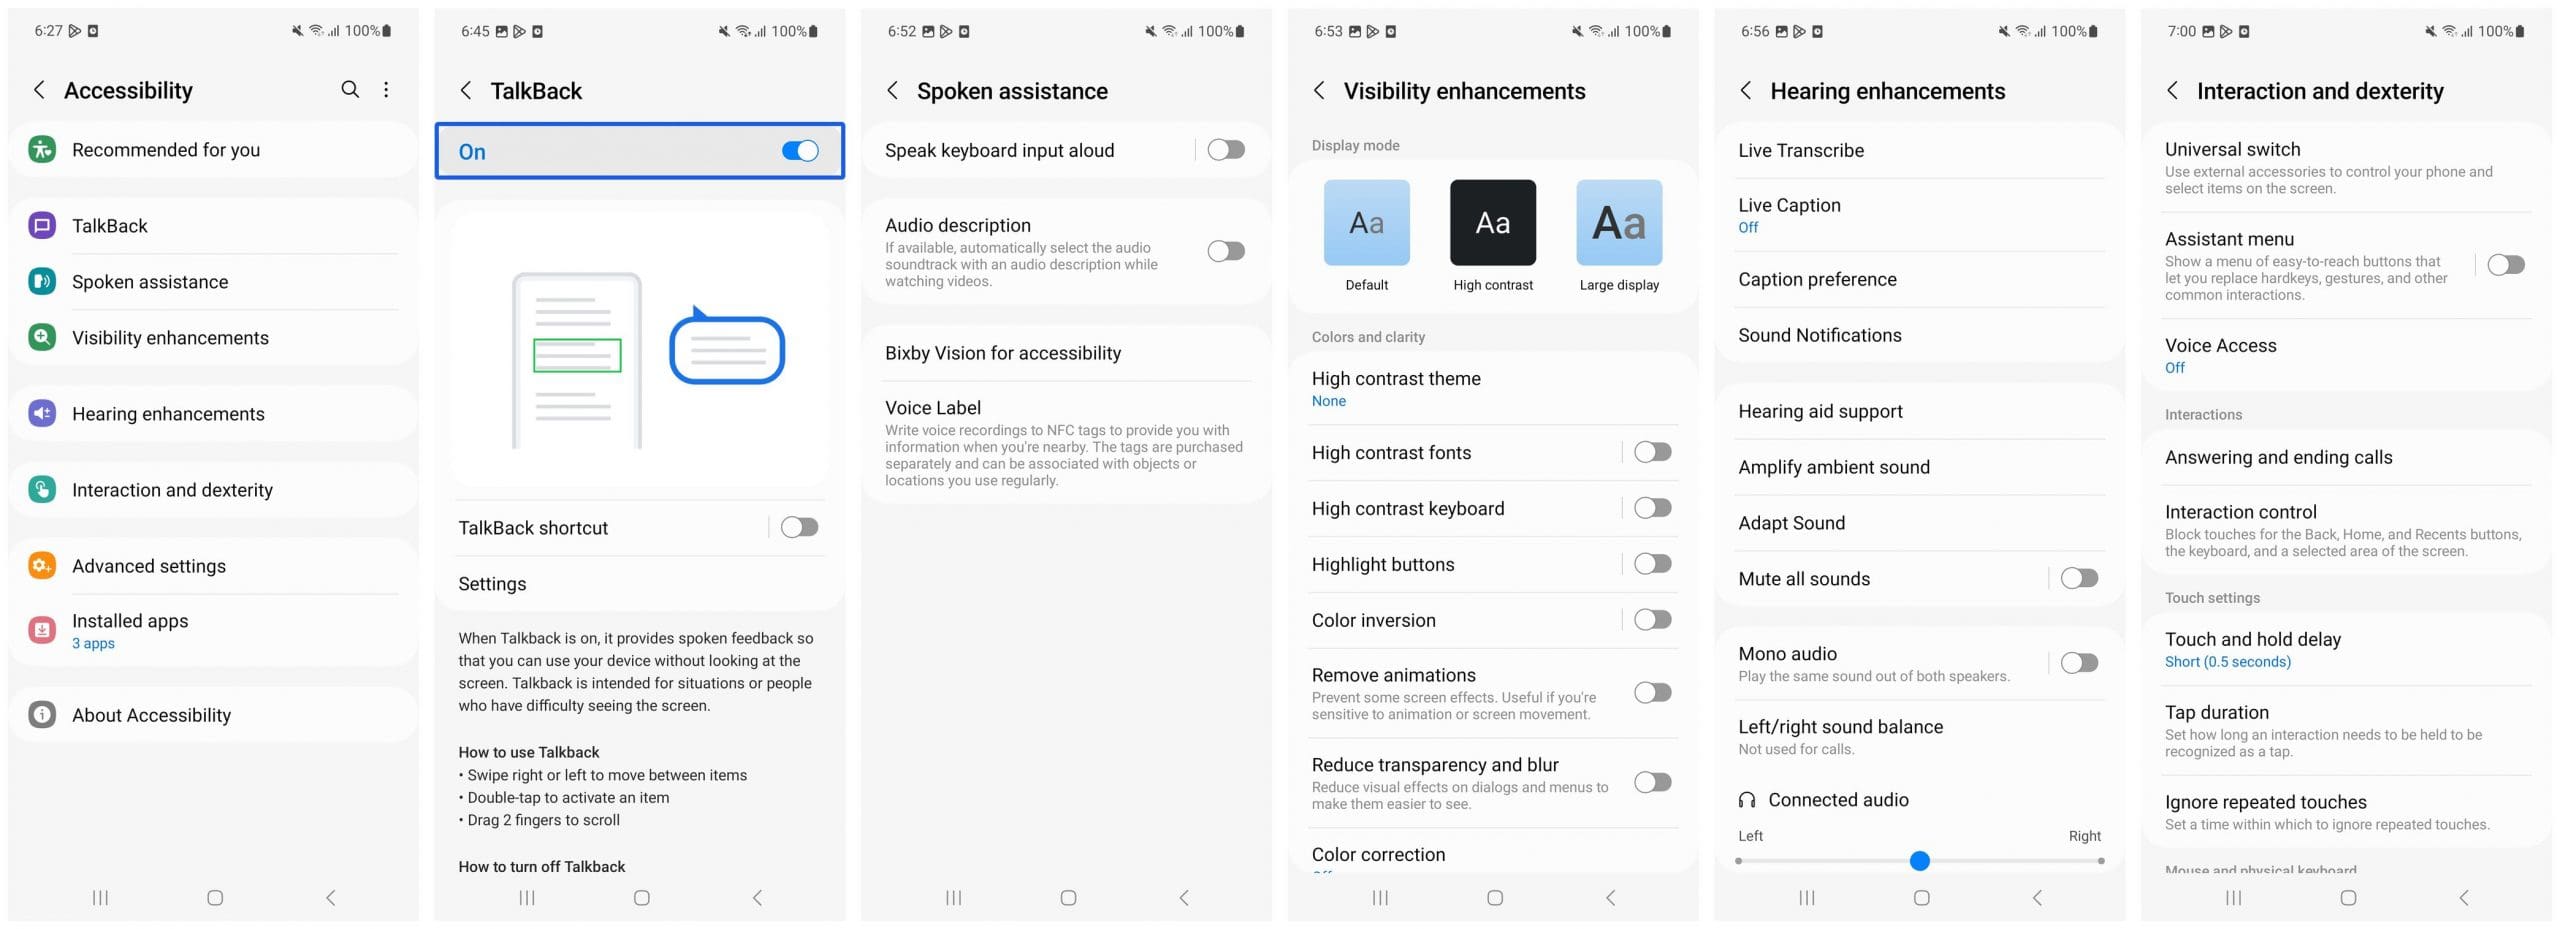 Android accessibility service with main accessibility features